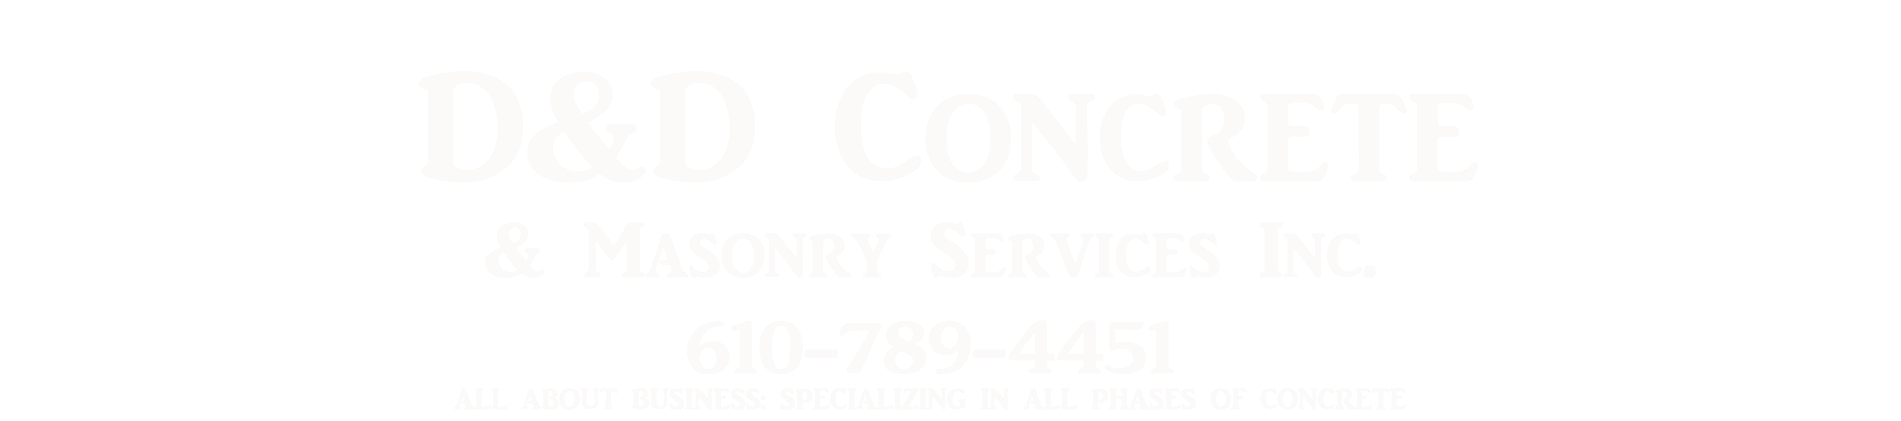 D&D Concrete & Masonry Services Inc.-All about business: Specializing in all phases of concrete